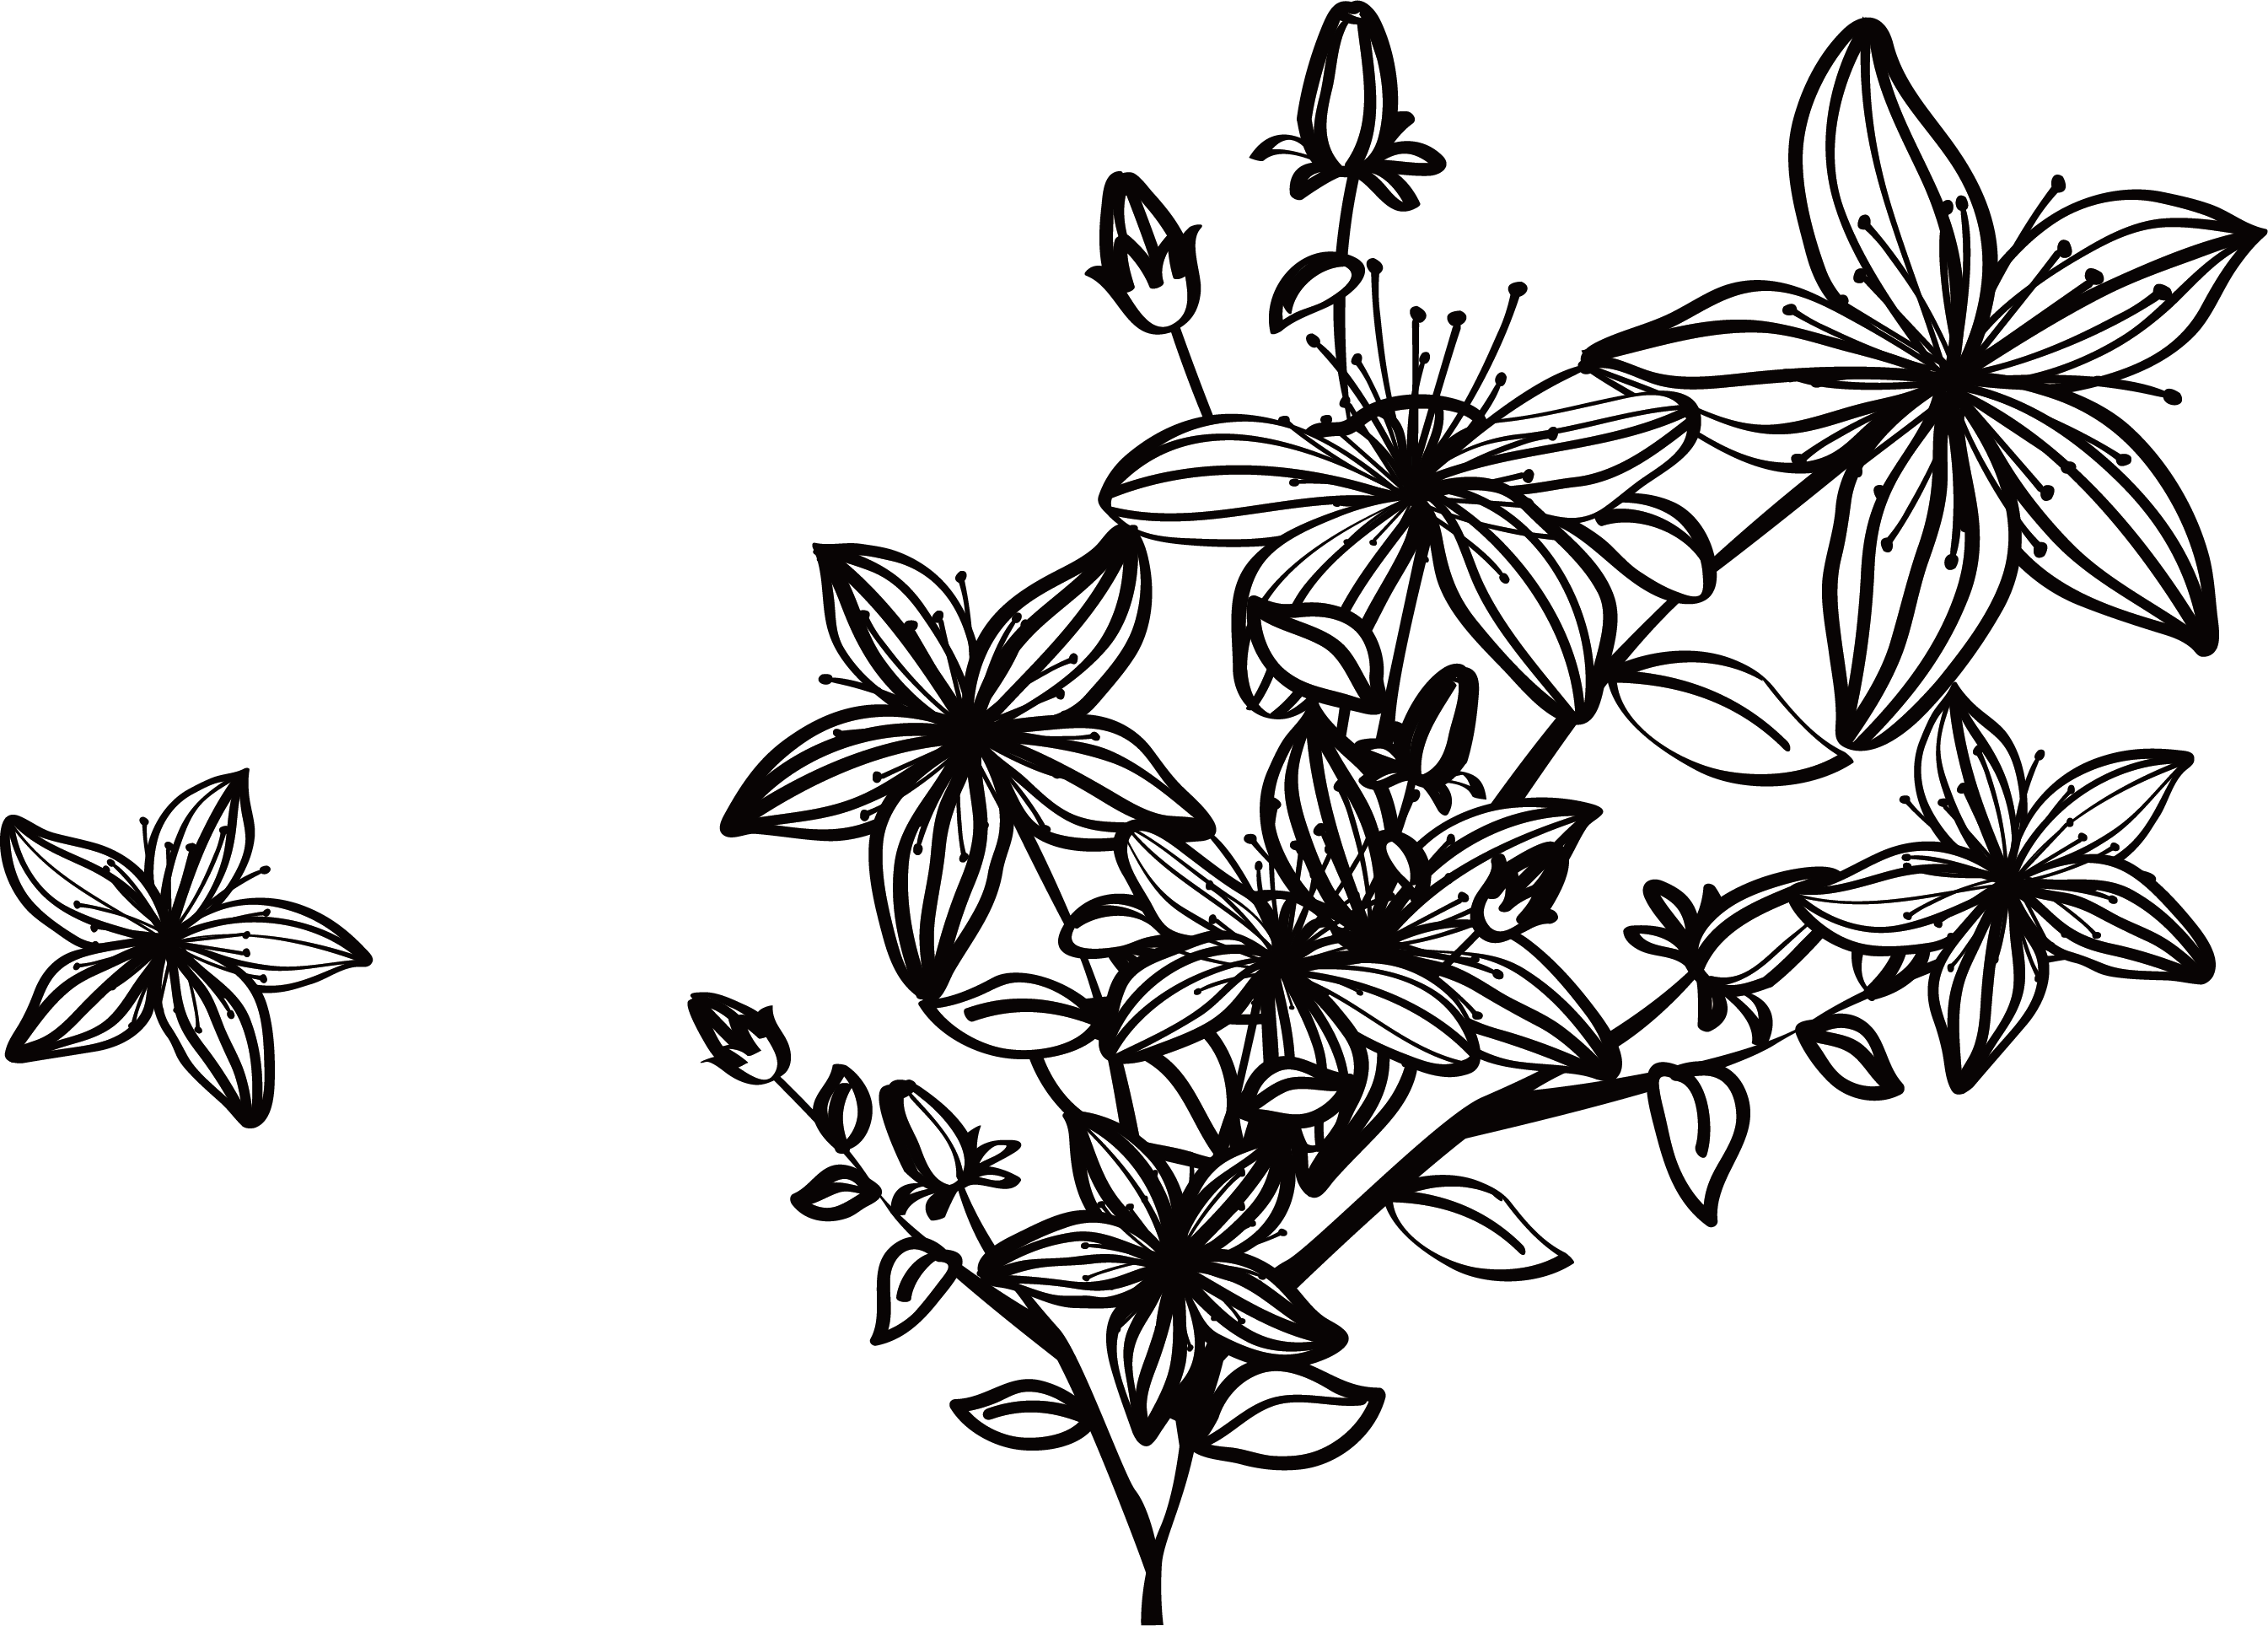 Black Vector Flower Png Images : Png earring jewelry jewel silver ...